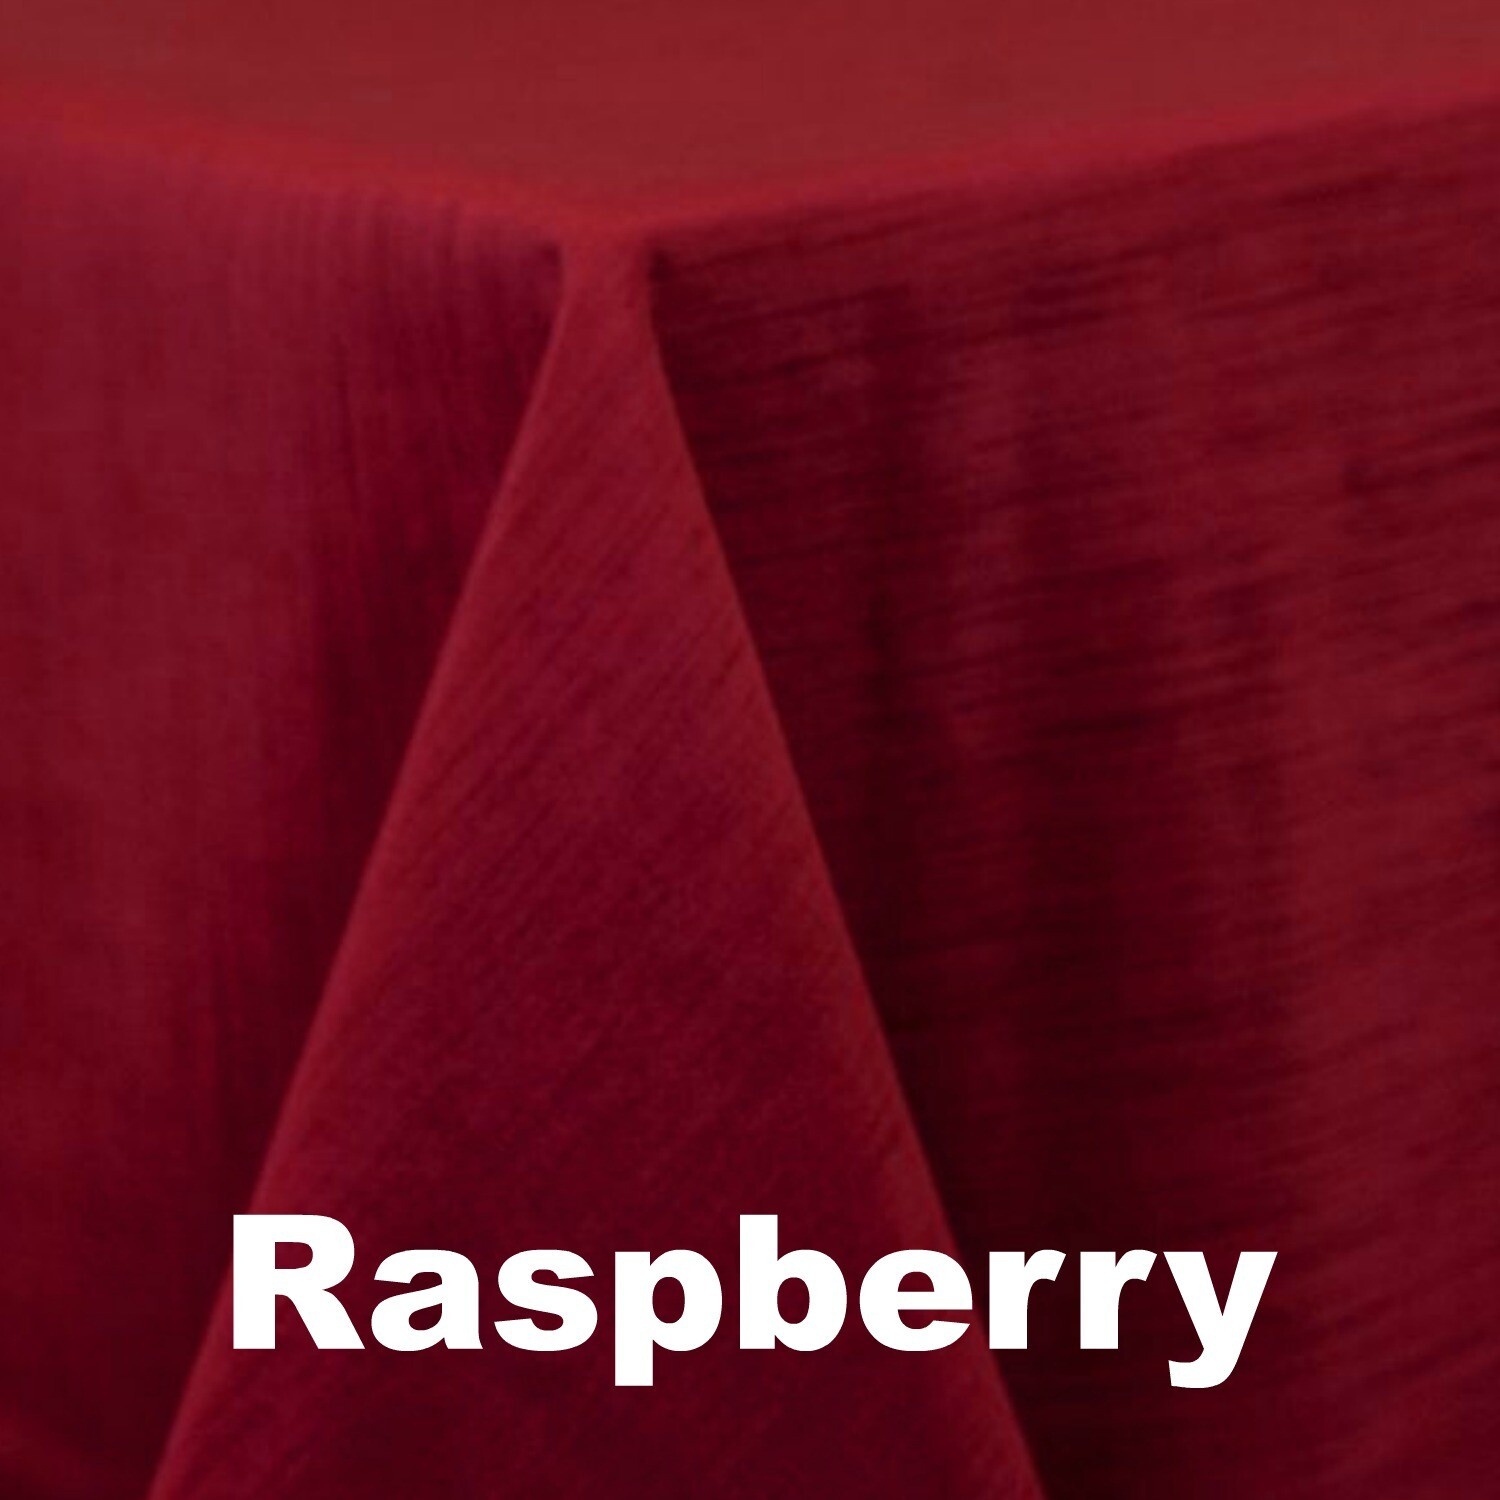 Linens For Less 60"x120" Rectangle in Raspberry Majestic Dupioni